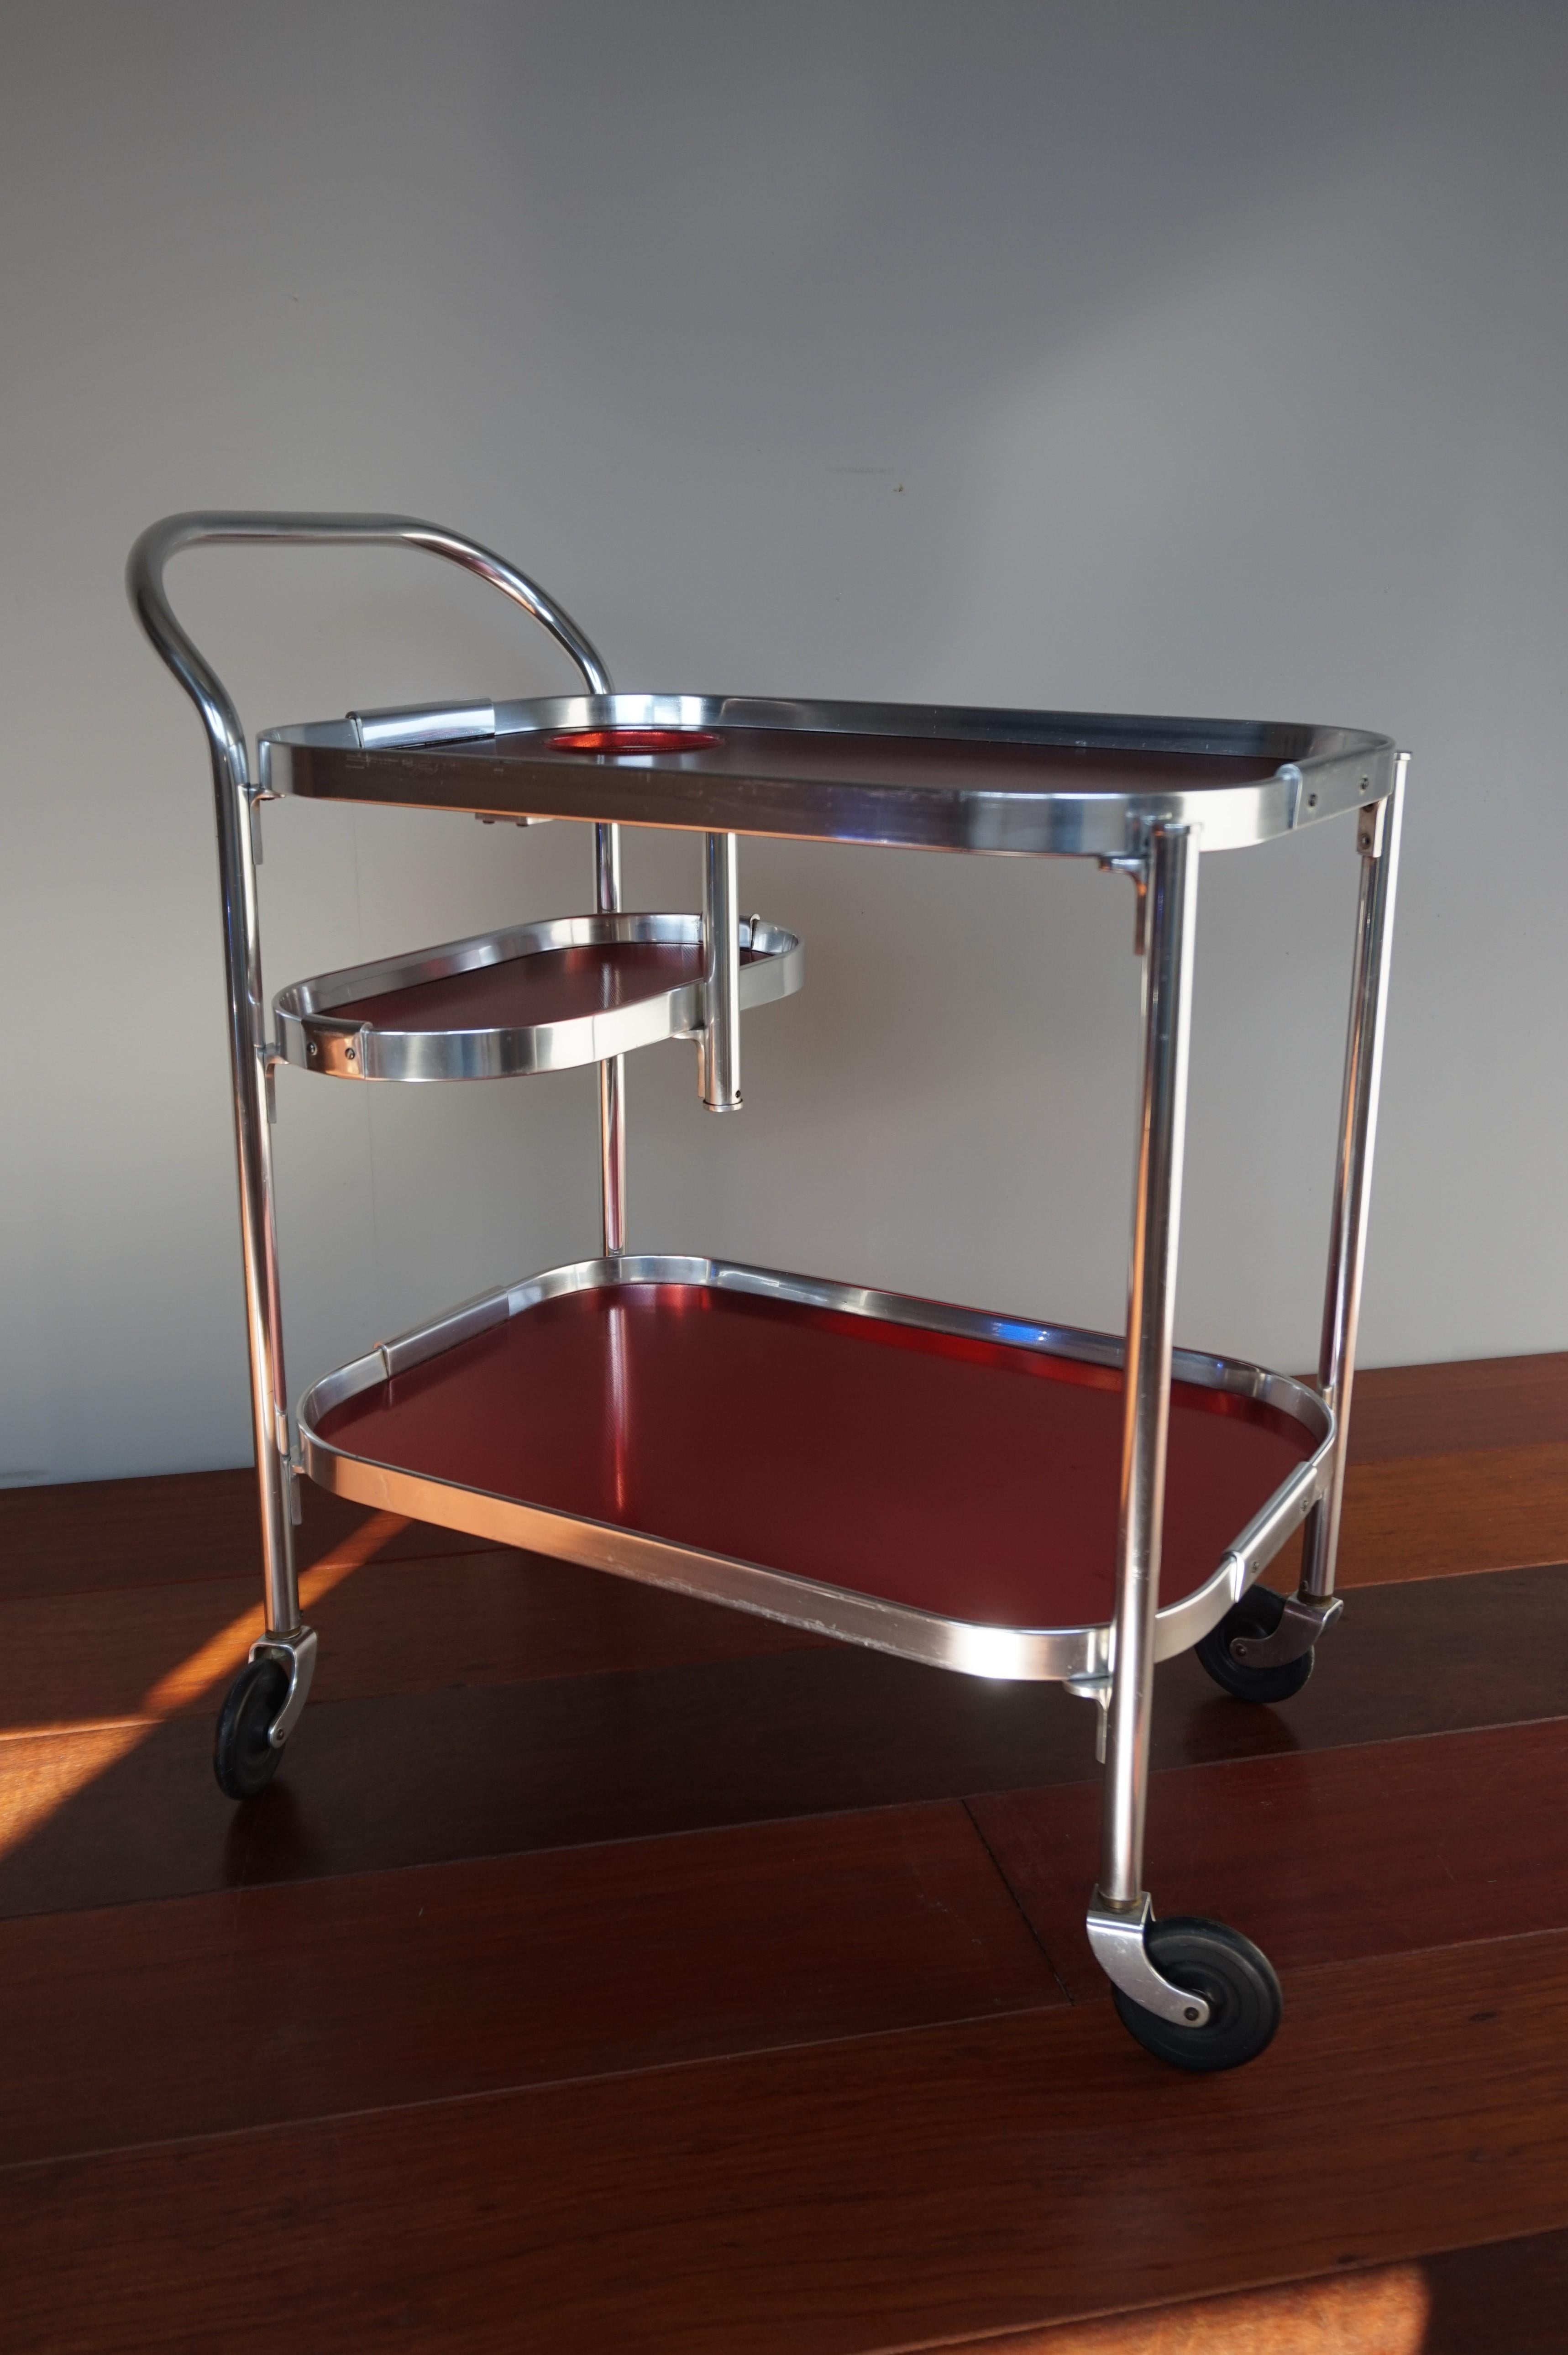 Rubber Midcentury Modern Drinks Trolley  /Bar Cart Made & Designed in England by Kaymet